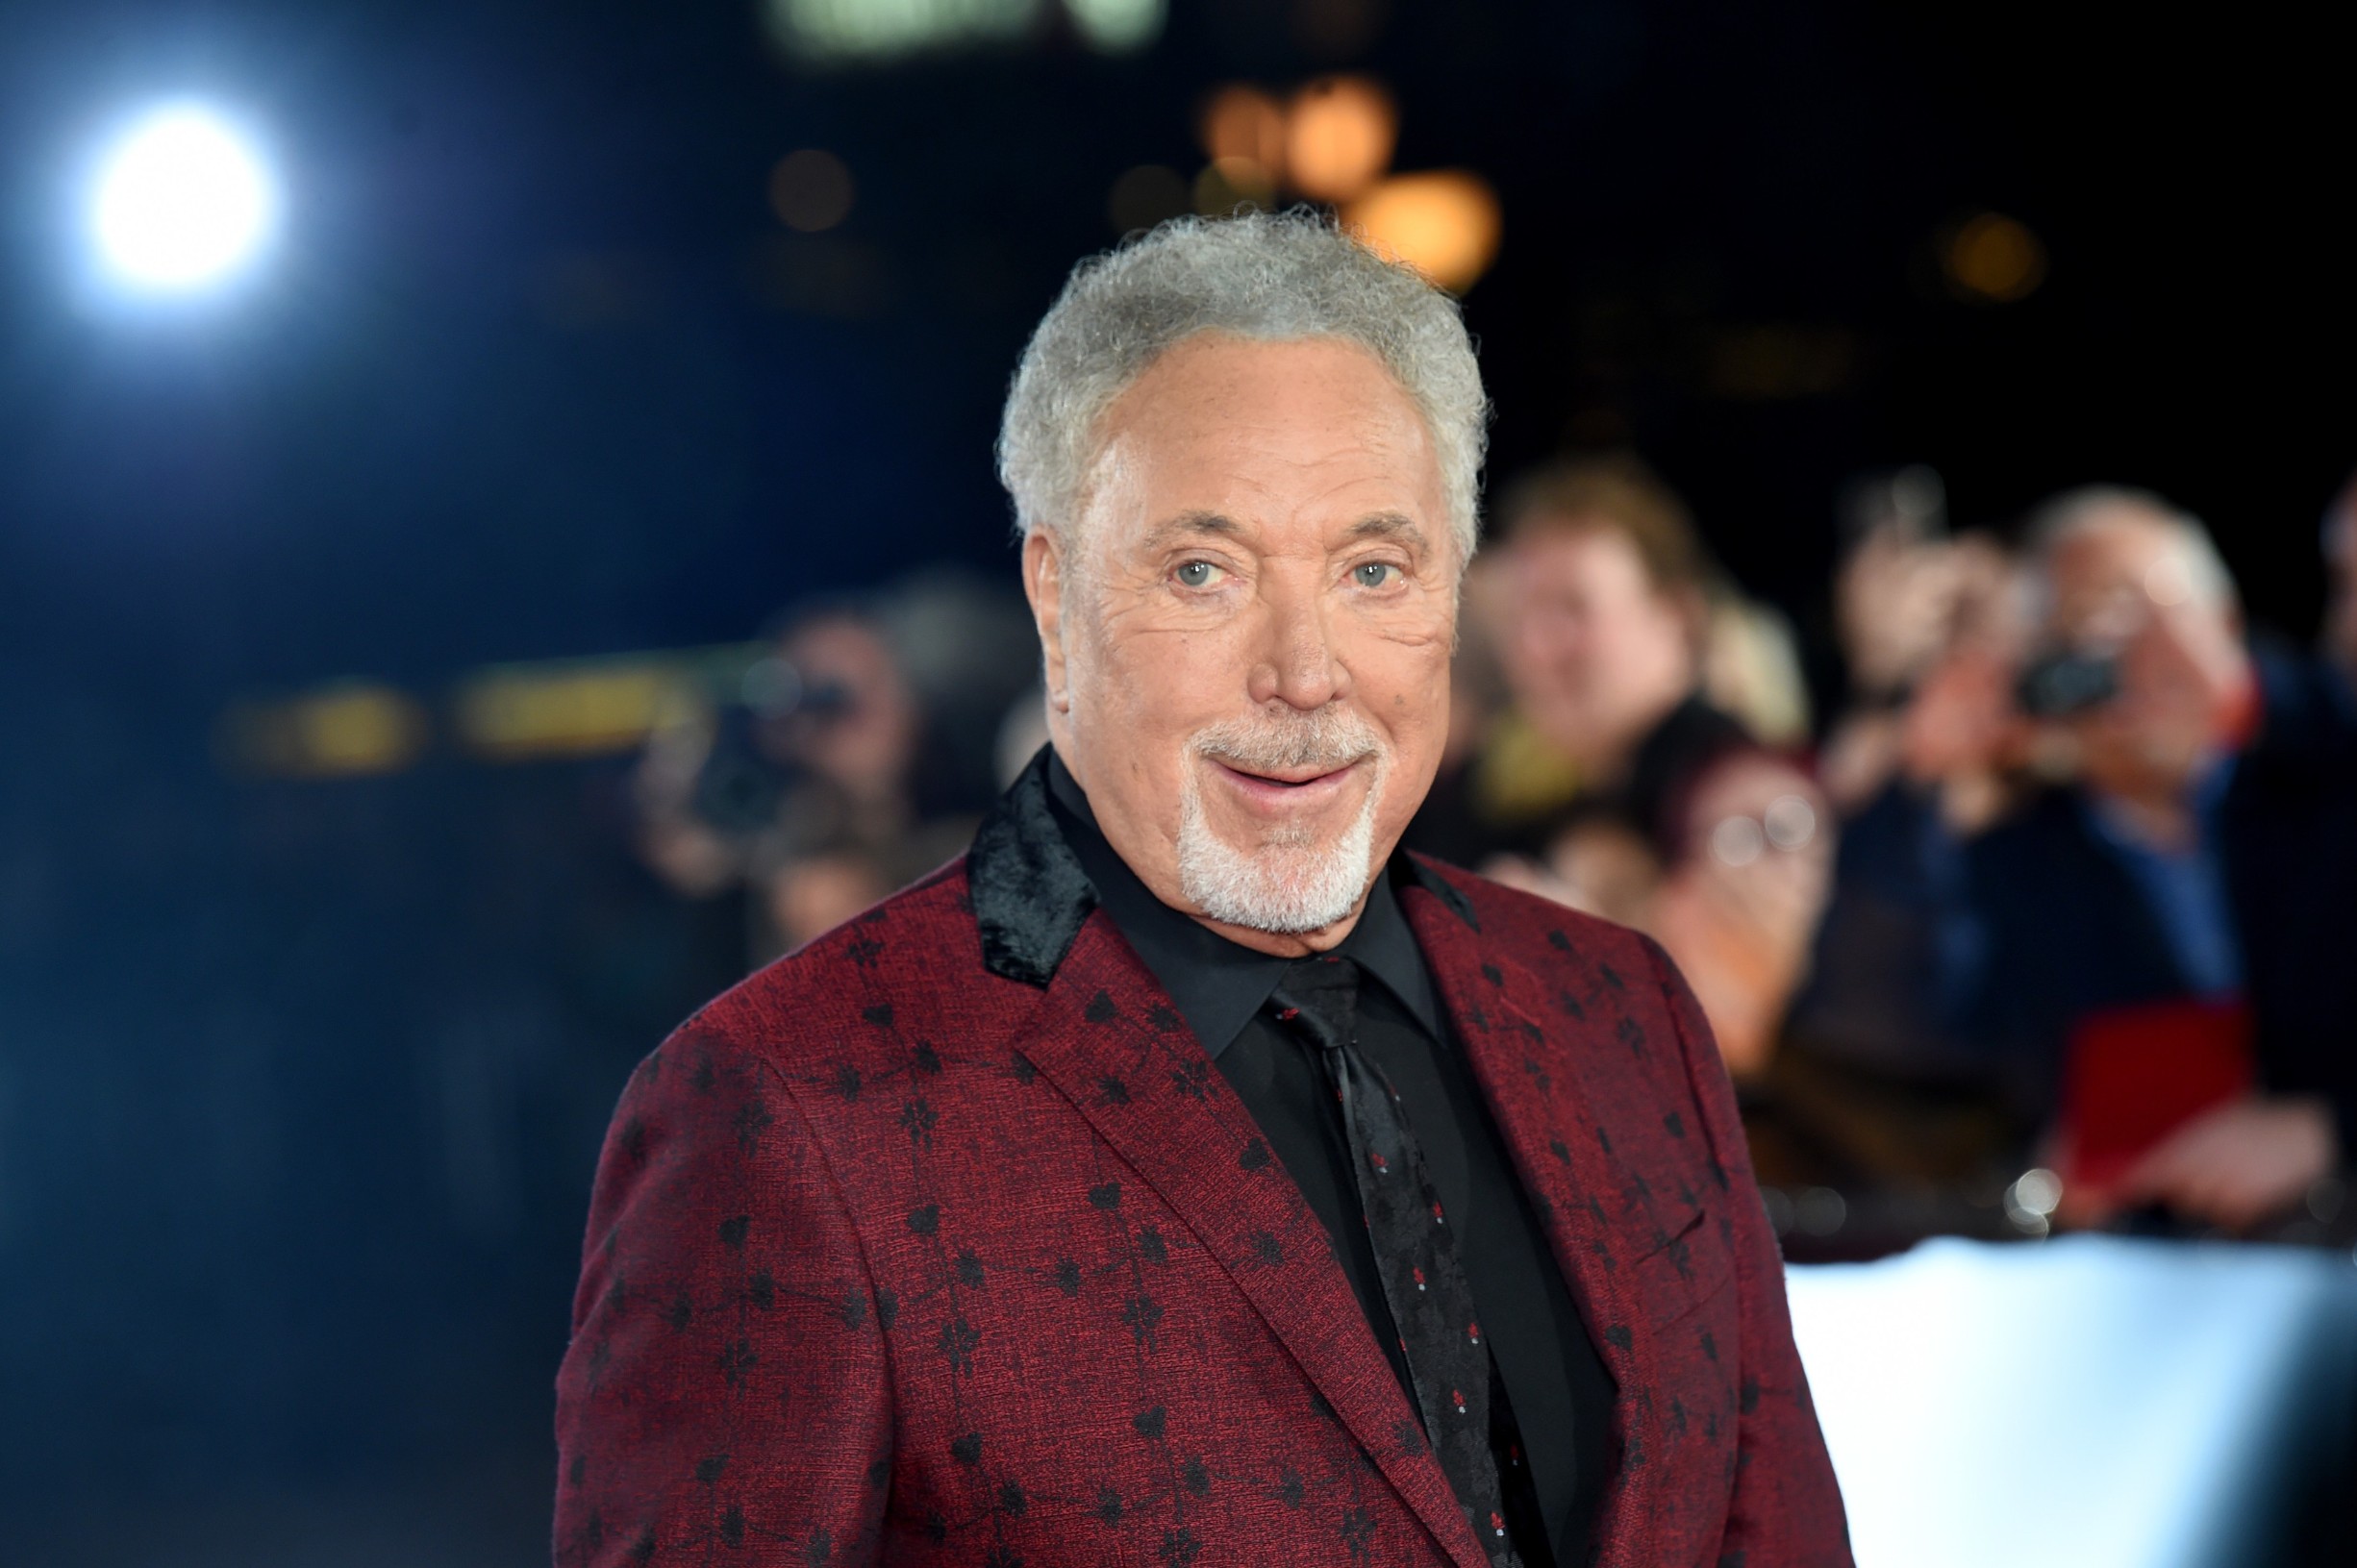 Tom Jones
'The Voice UK' TV show photocall, Manchester, UK - 15 Oct 2018,Image: 391188420, License: Rights-managed, Restrictions: , Model Release: no